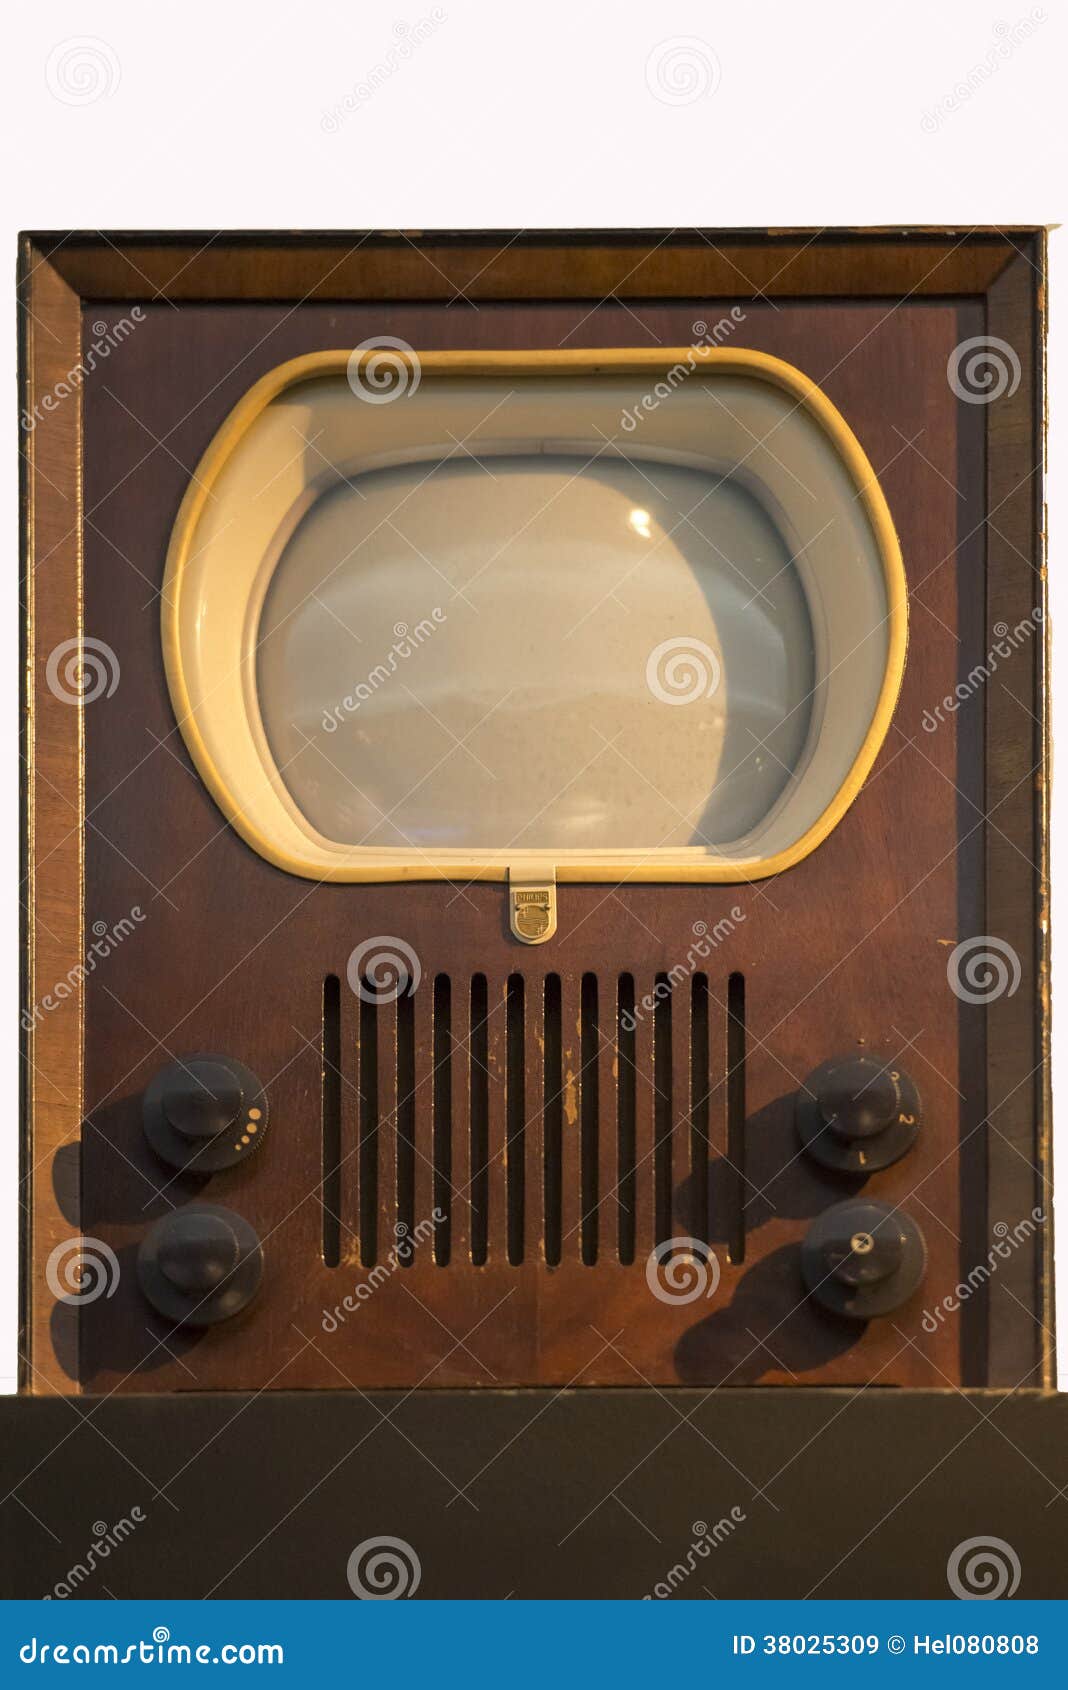 first television - tv - philips 1950, vintage television